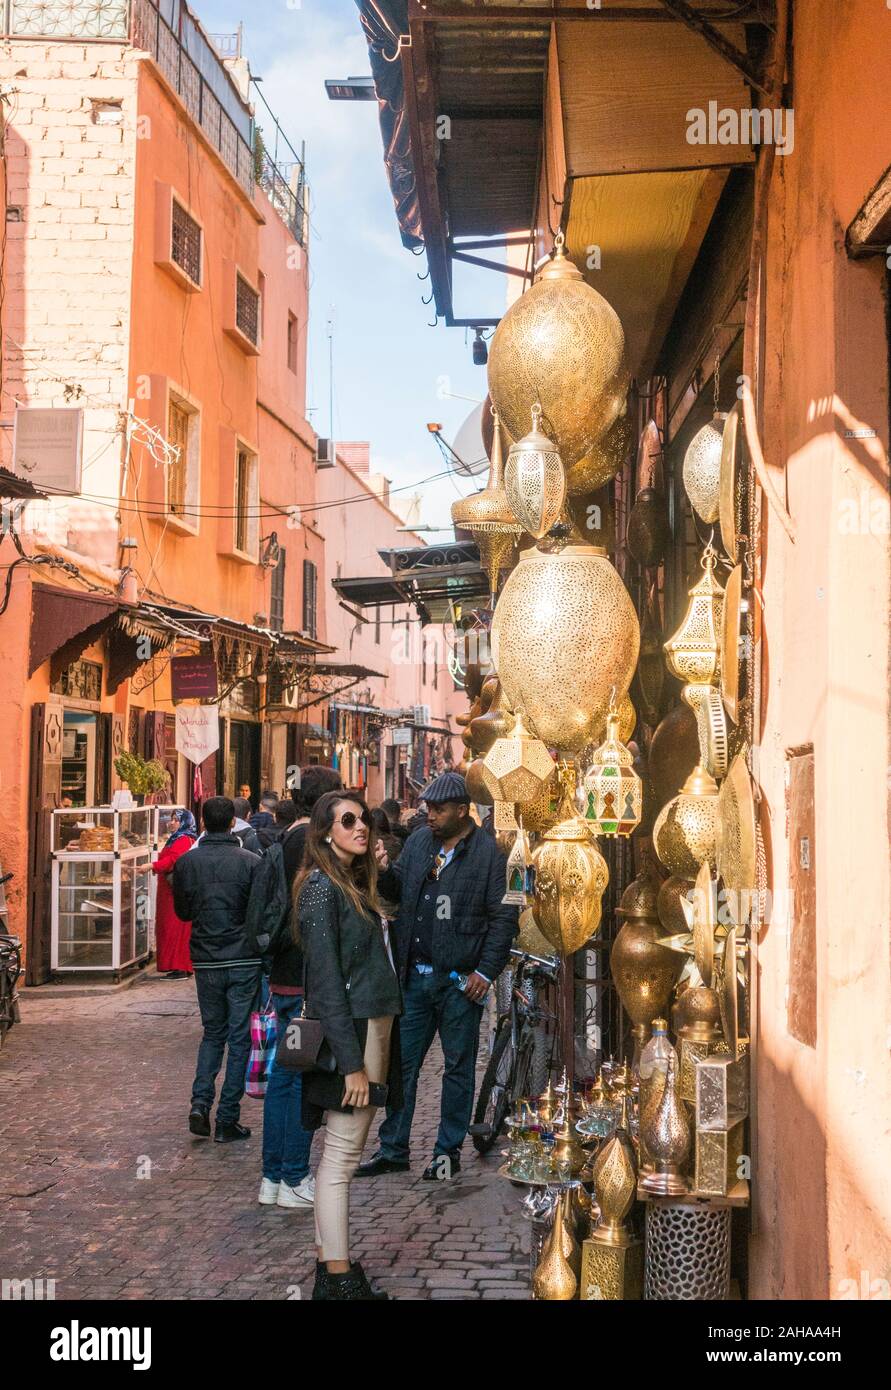 Kasbah, Marrakech,  shops displaying copper work, Morocco, northern Africa Stock Photo